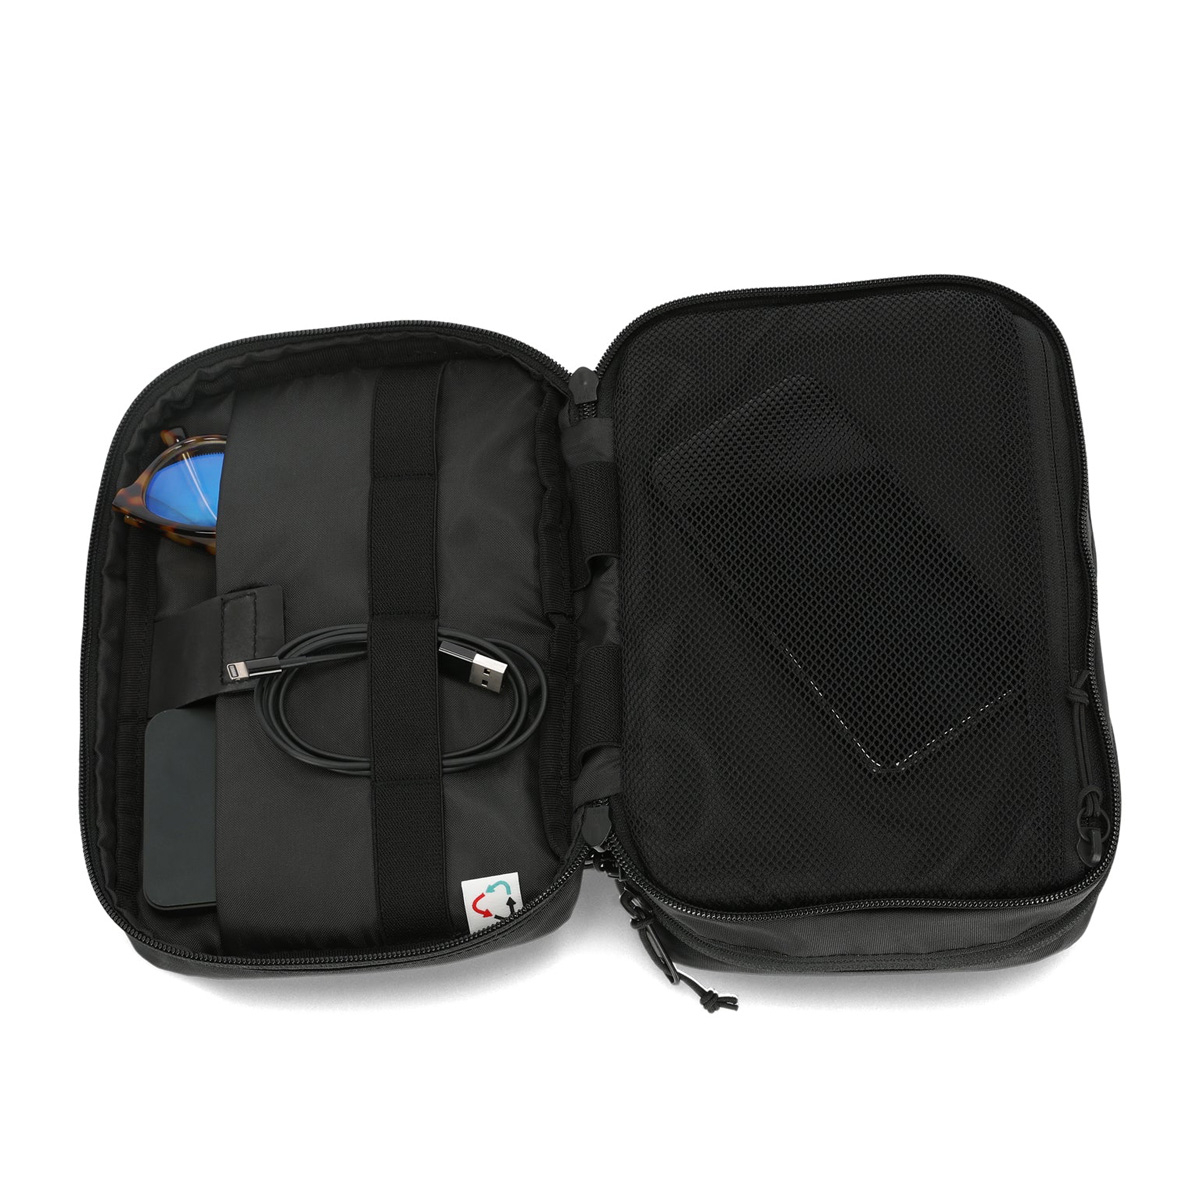 Topo Designs Tech Case, with a internal mesh pocket and an internal padded tablet sleeve with elastic daisy chain webbing